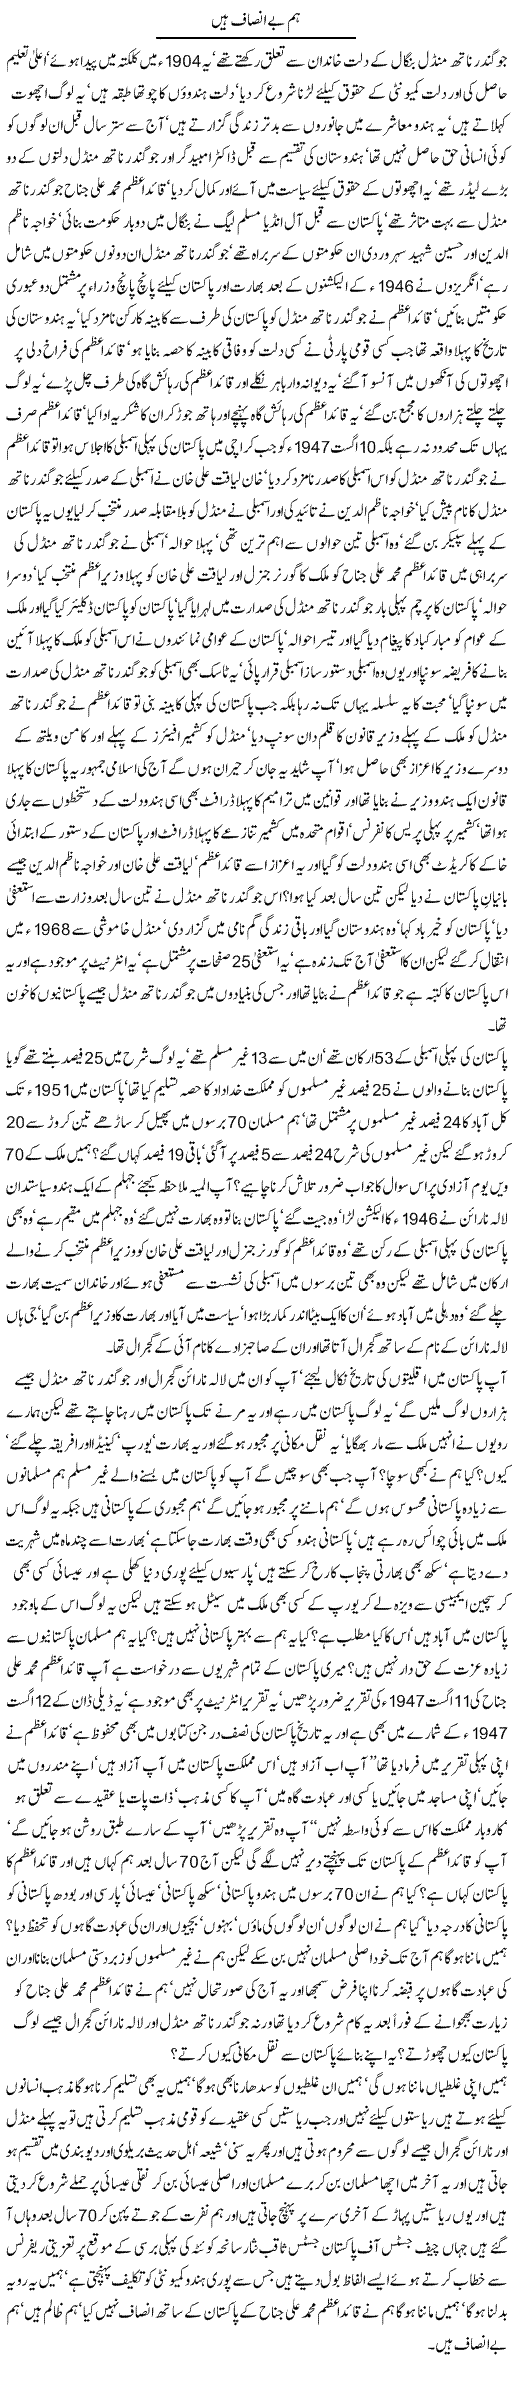 Hum Be Insaf Hain By Javed Chaudhry